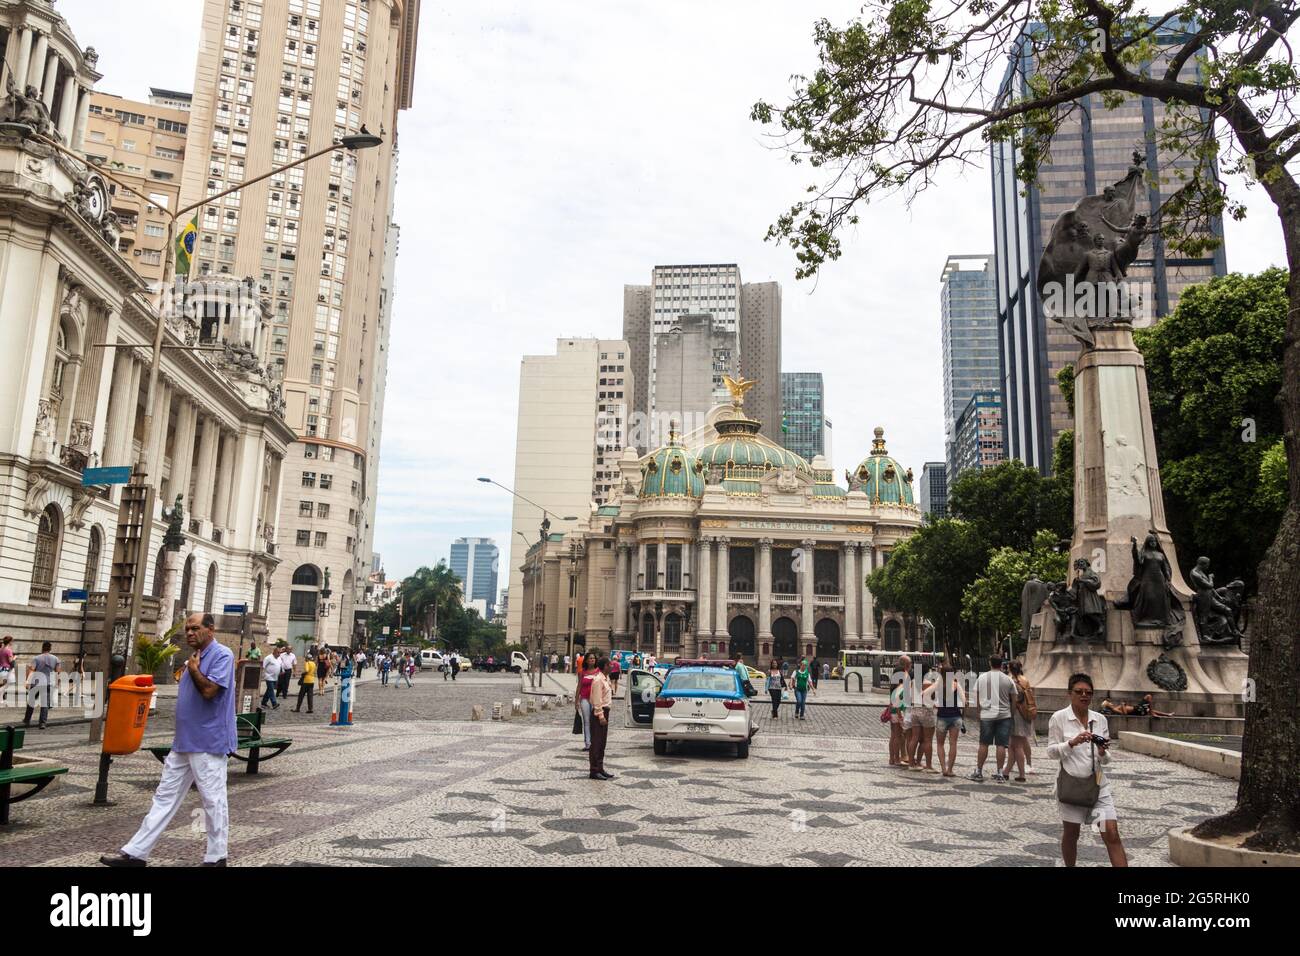 RIO DE JANEIRO, BRAZIL - JANUARY 28, 2015: People walk on Praca Alagoas suare in front of the Town Hall  and the Municipal Theatre in Rio de Janeiro. Stock Photo